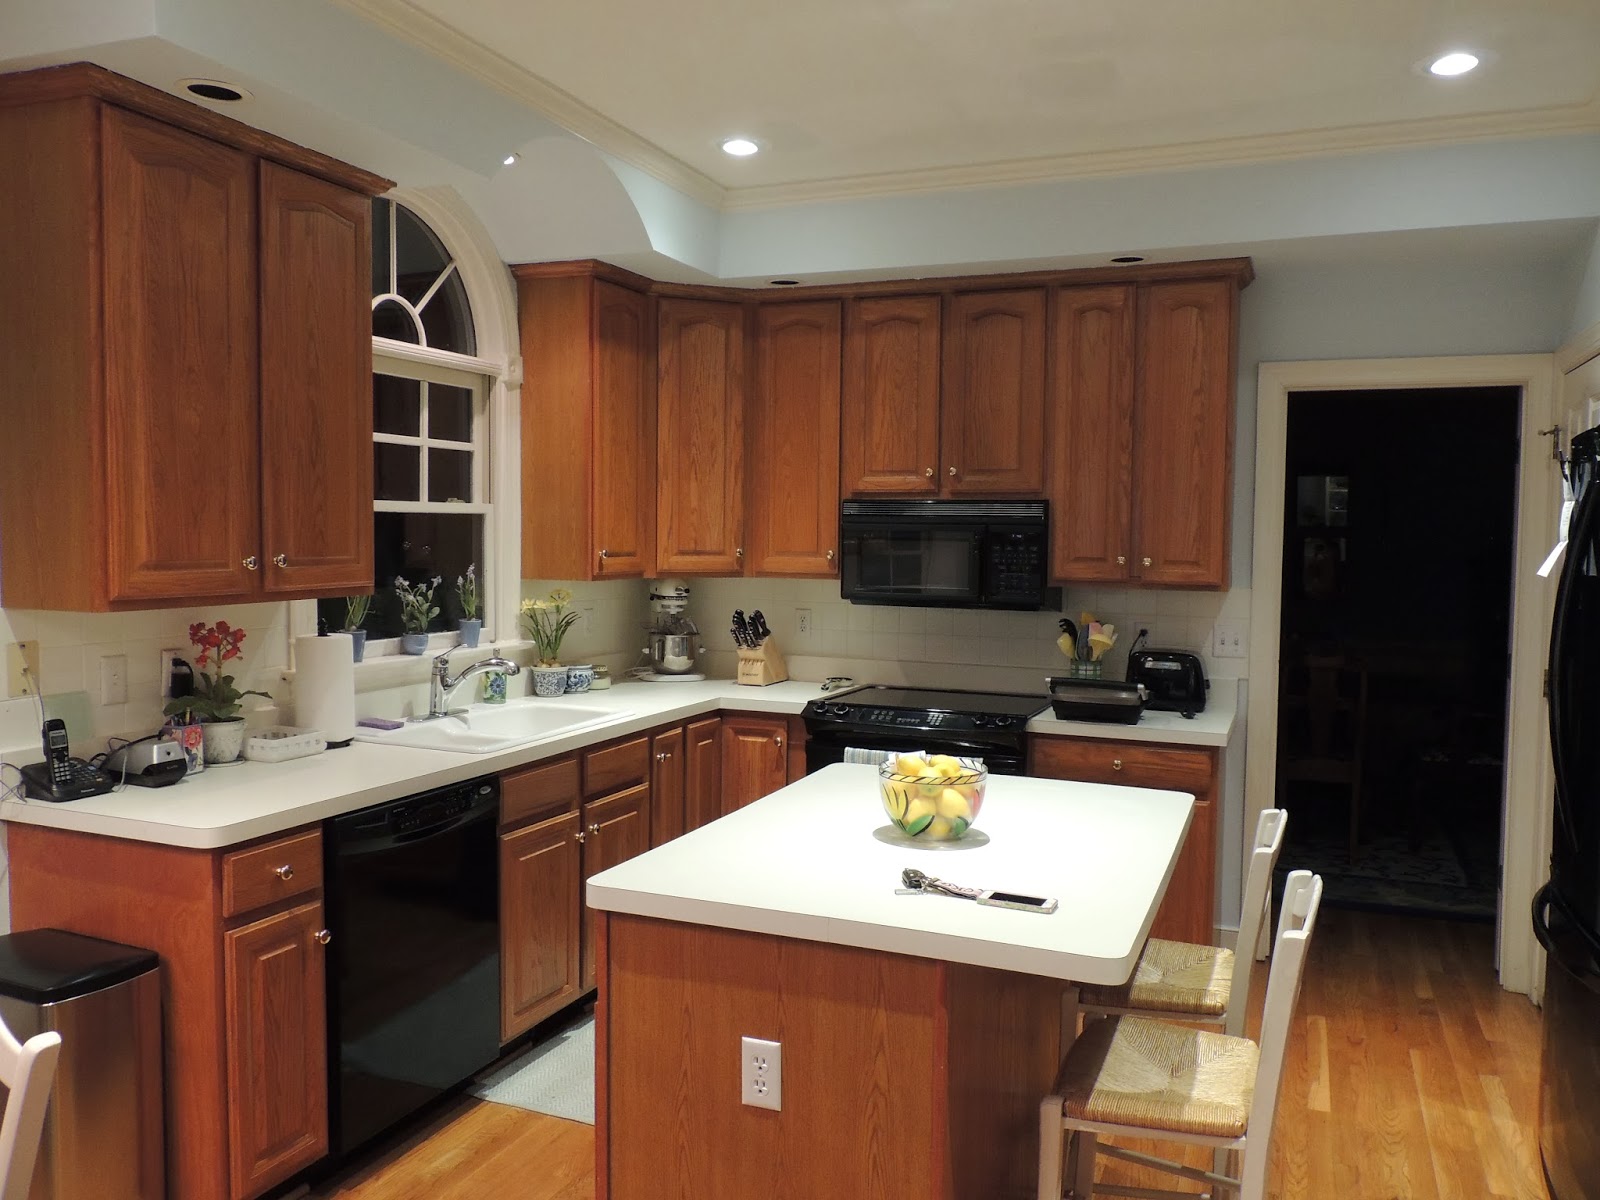 How Much Does It Cost To Paint Kitchen Cabinets